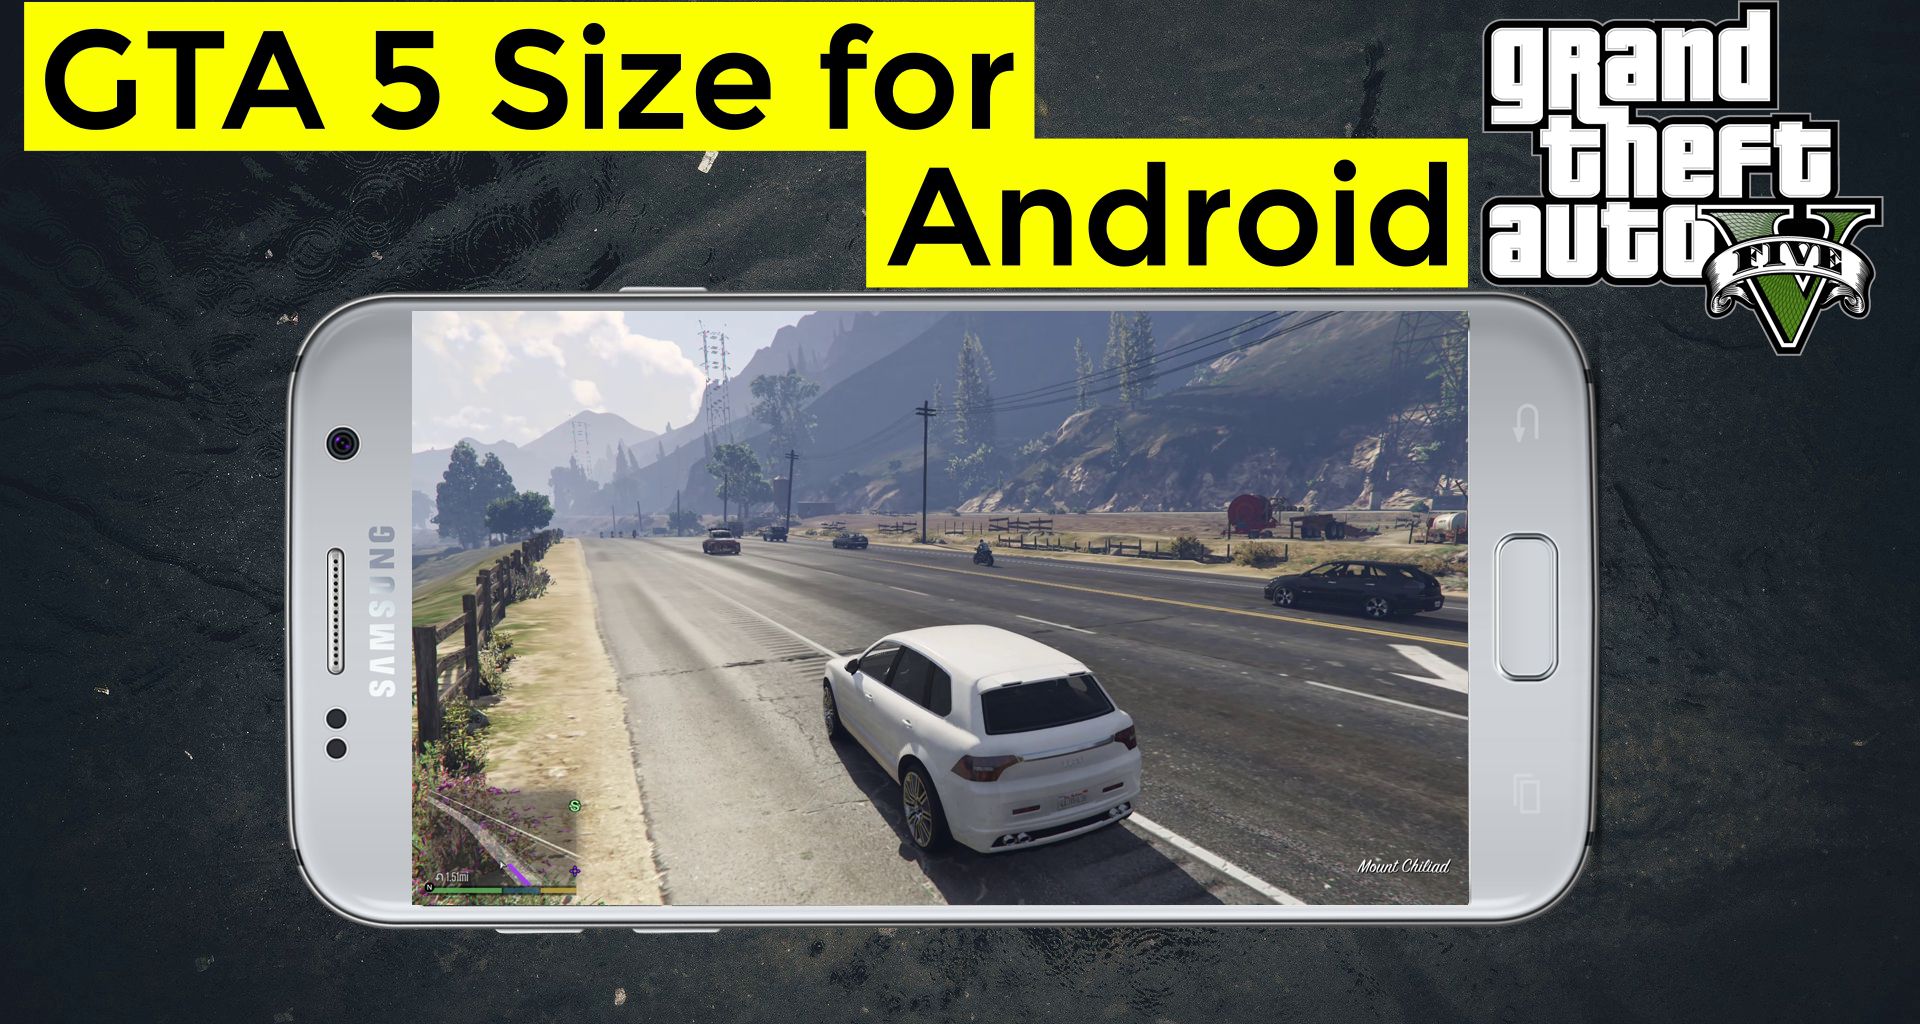 GTA 5 size for android